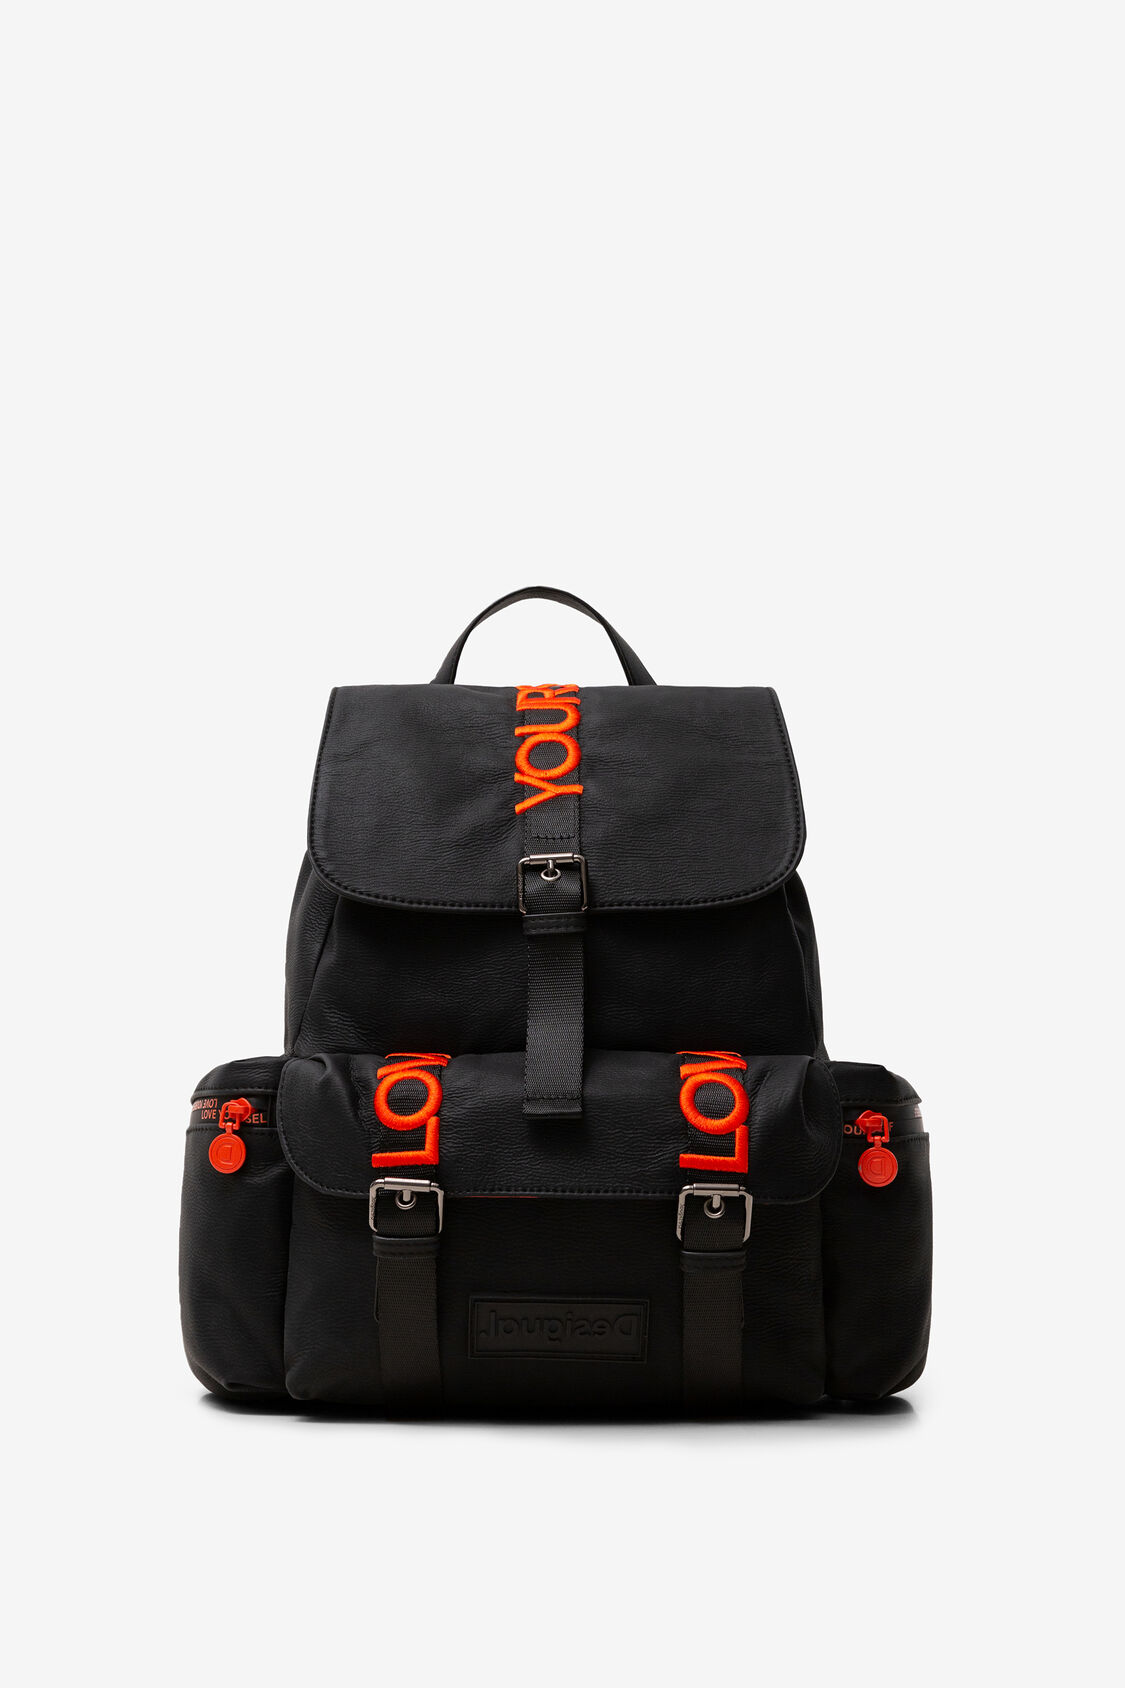 Buckles and message backpack